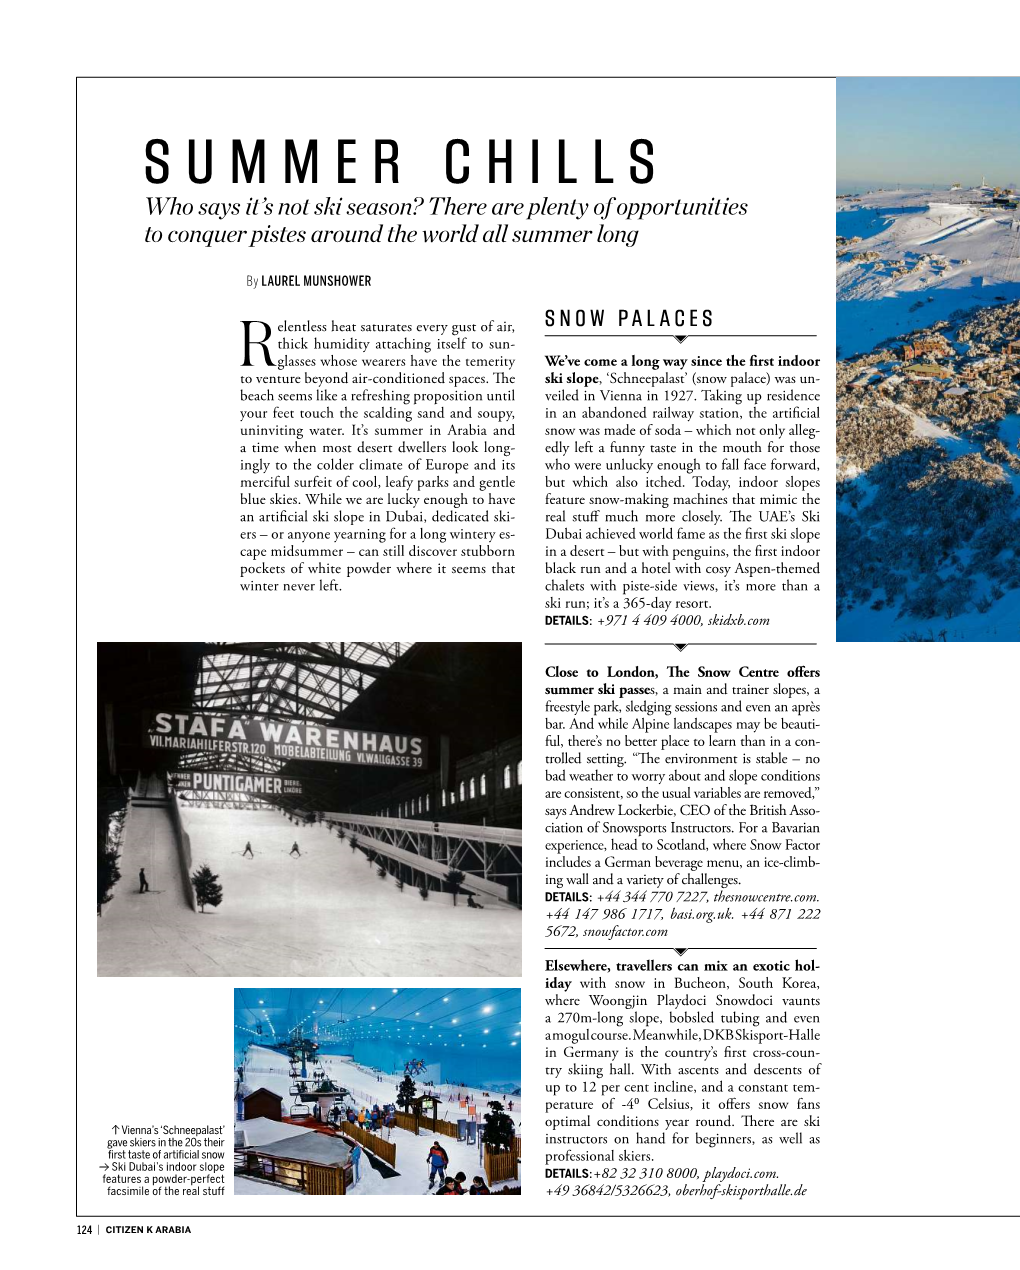 SUMMER CHILLS Who Says It’S Not Ski Season? There Are Plenty of Opportunities to Conquer Pistes Around the World All Summer Long